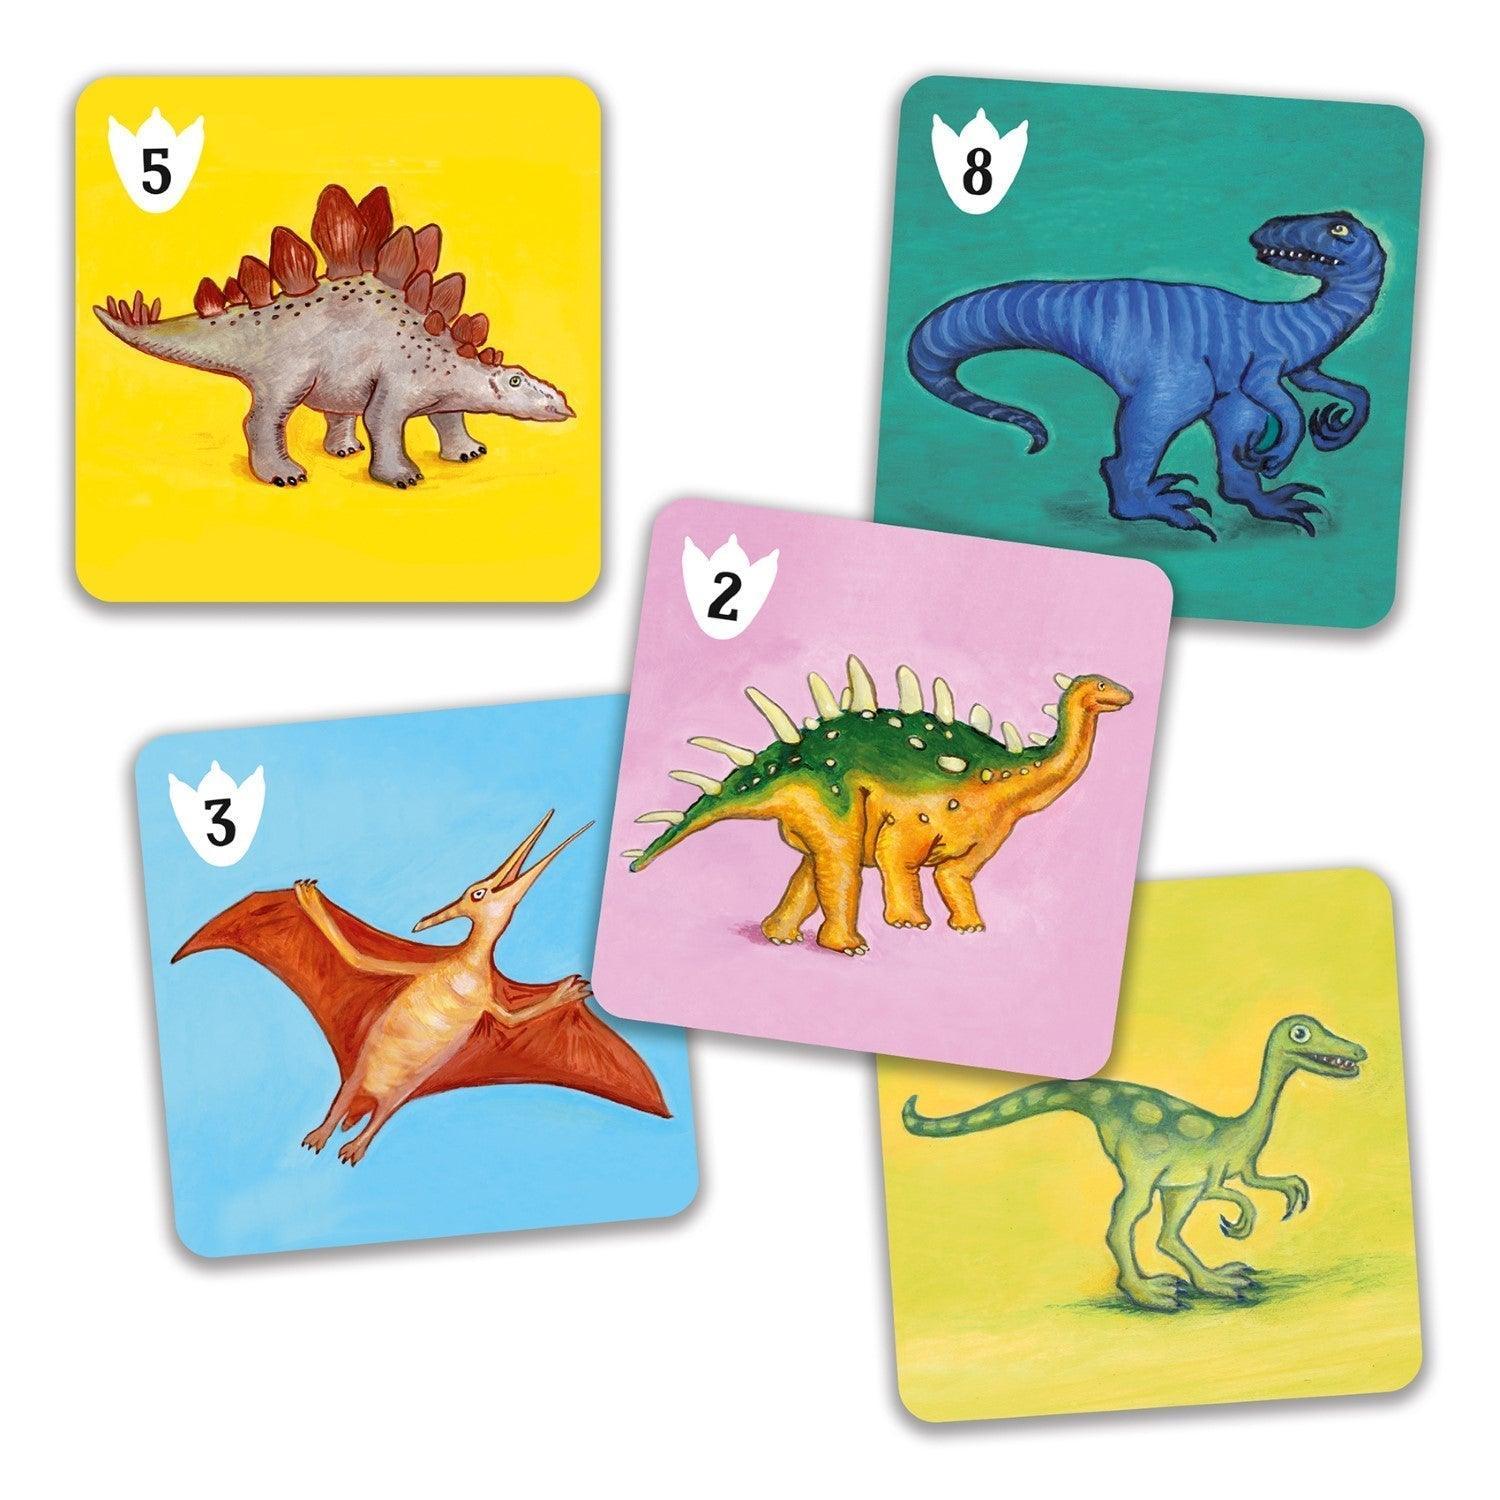 Djeco Batasaurus War Memory Playing Card Game - Why and Whale